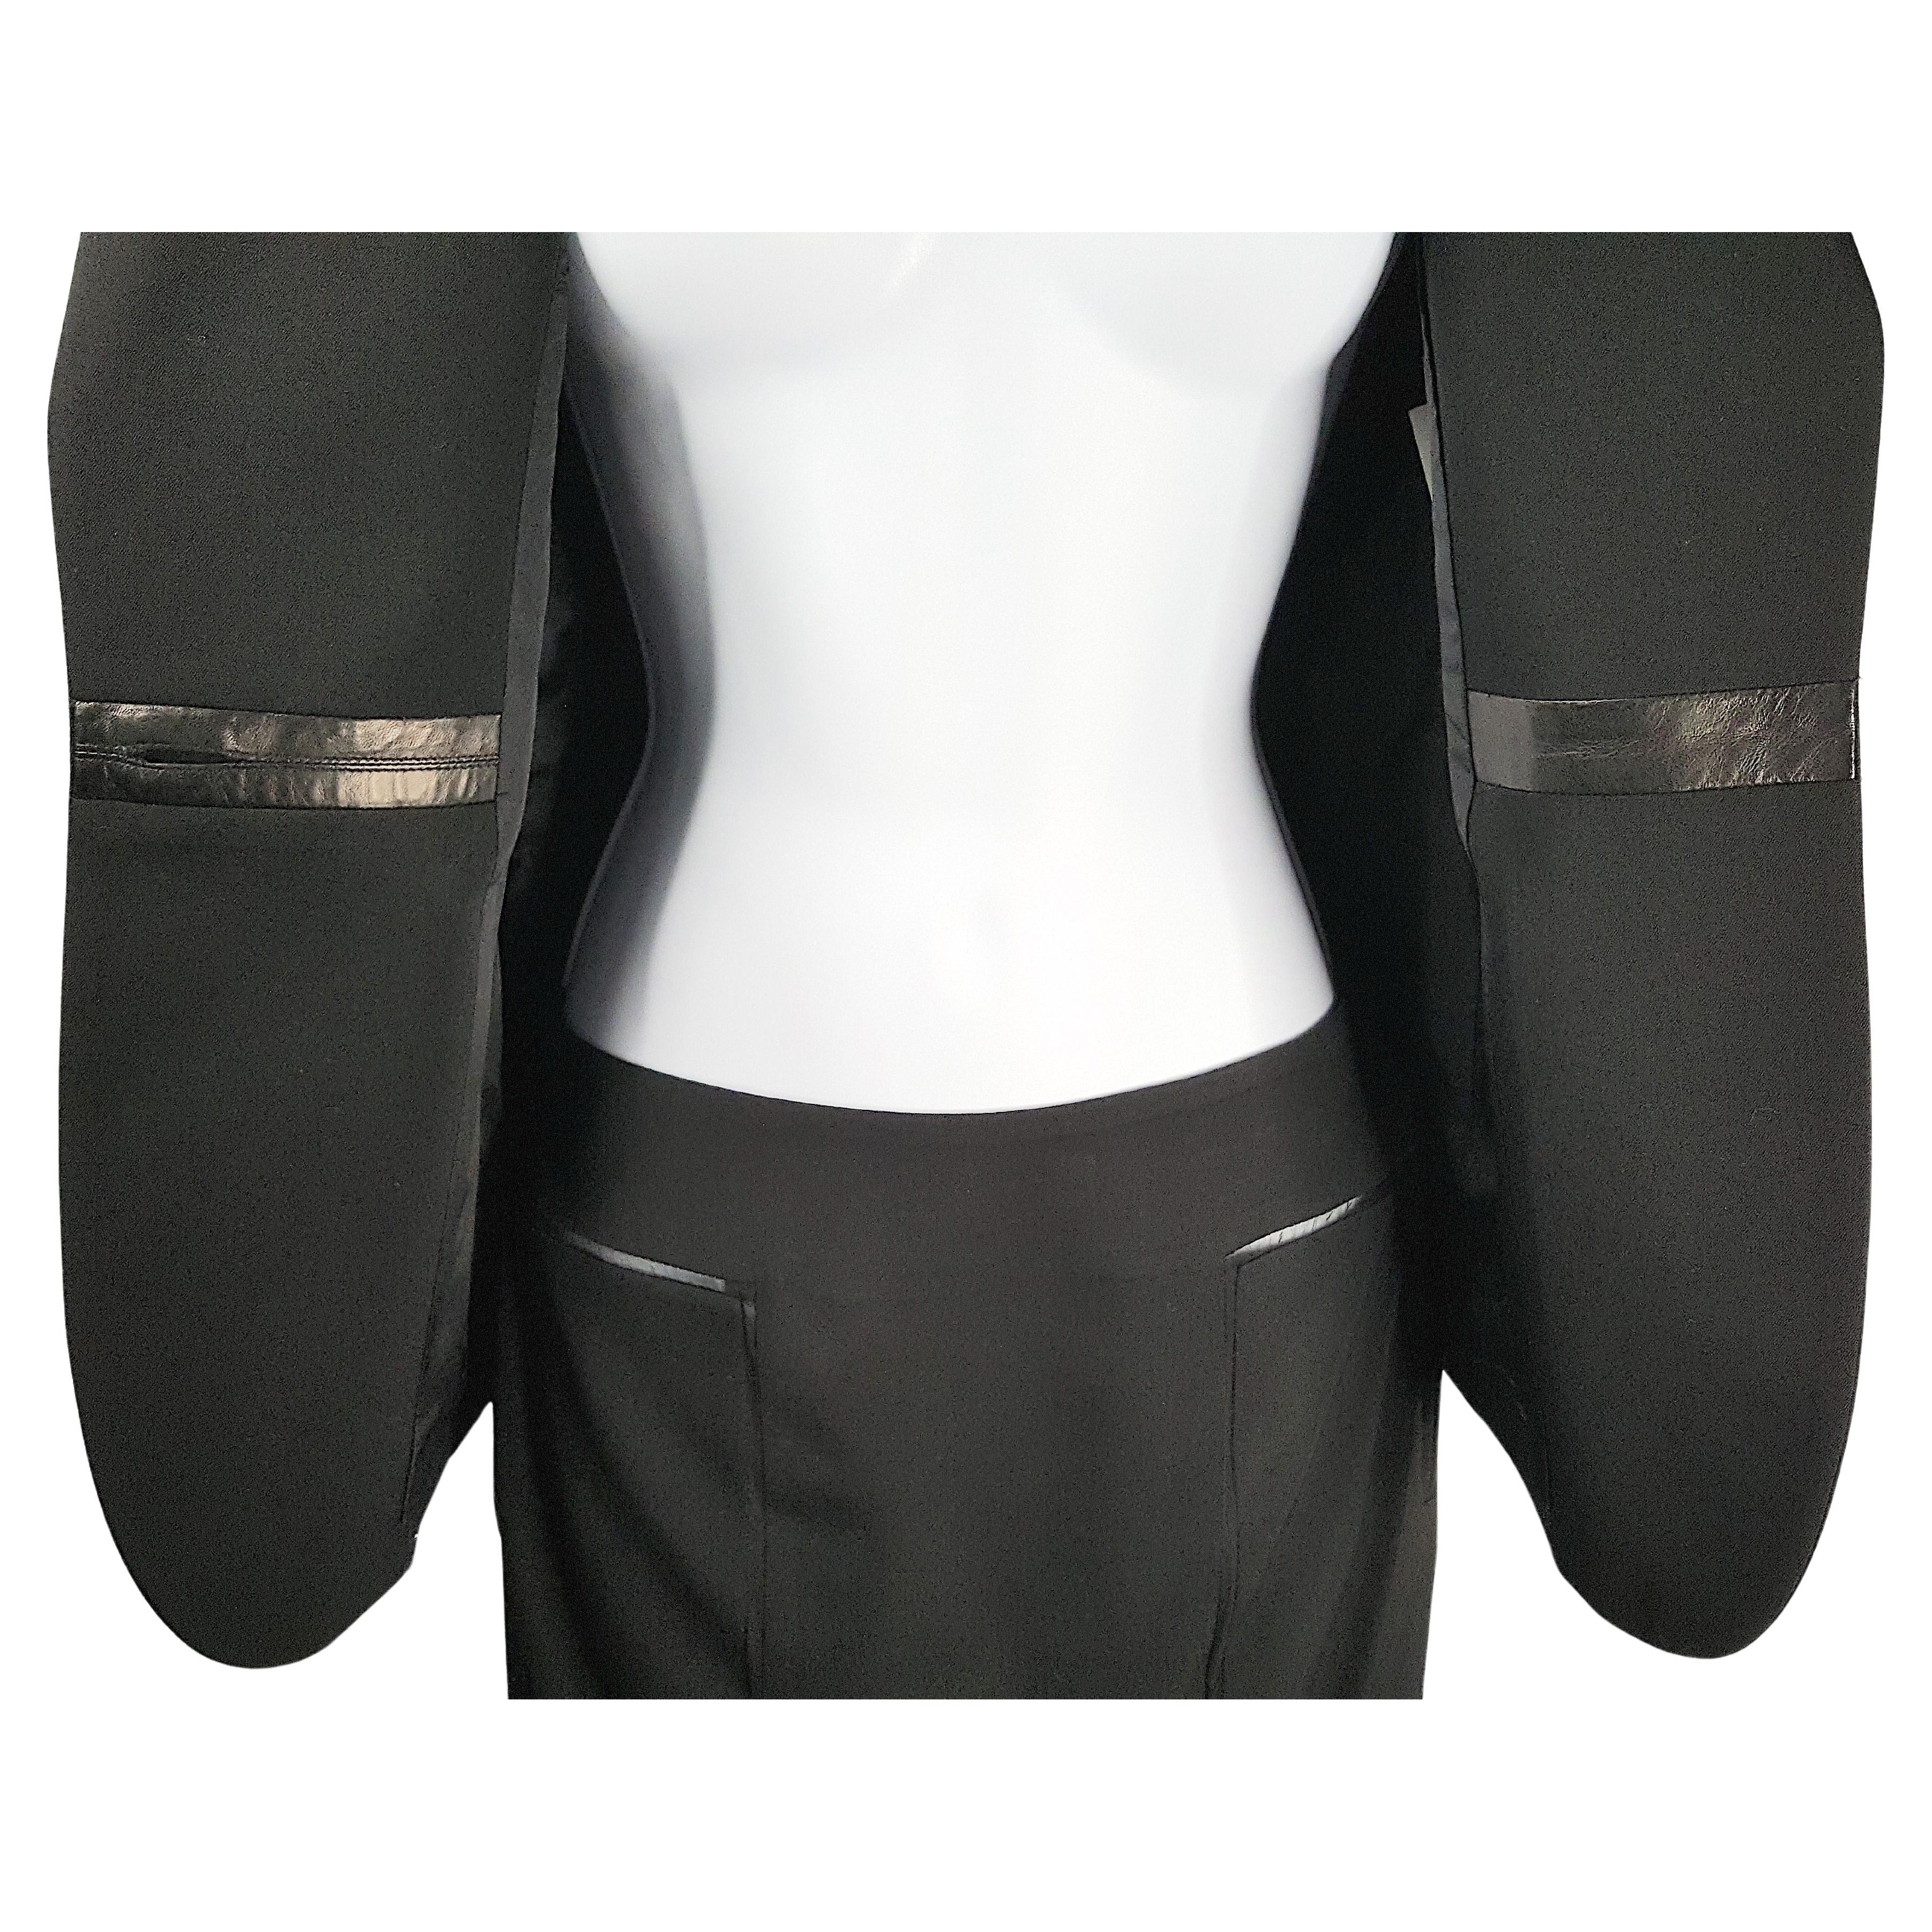 TomFord 2001 1stYSLCollection TuxedoStyle SheerSeams LeatherTrim Black SkirtSuit For Sale